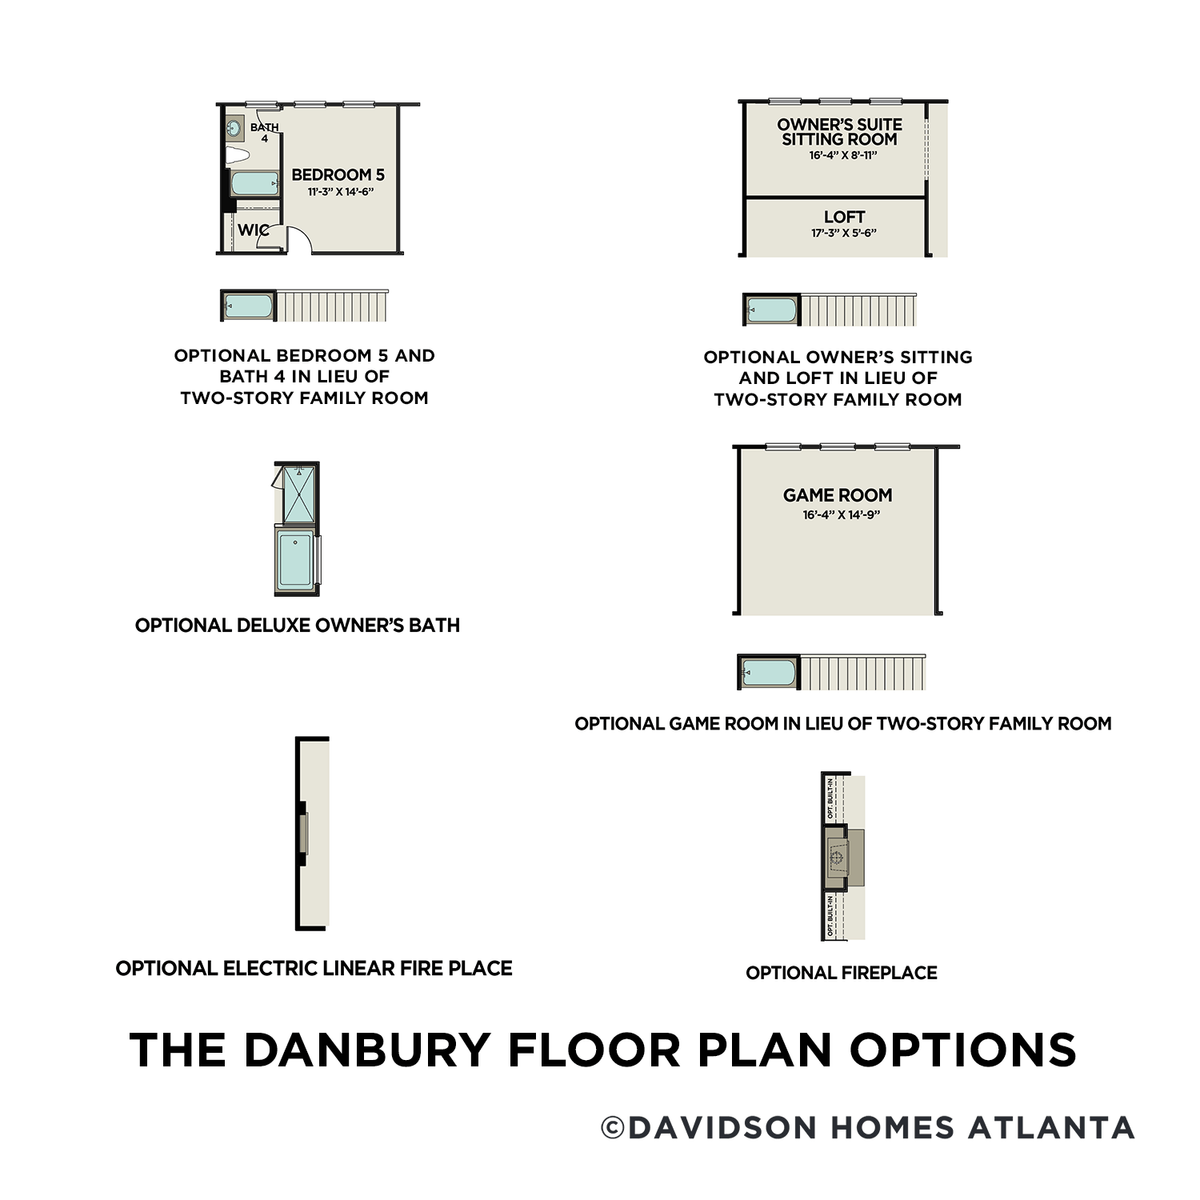 3 - The Danbury C floor plan layout for 5130 Shipley Avenue in Davidson Homes' Cooper Place community.